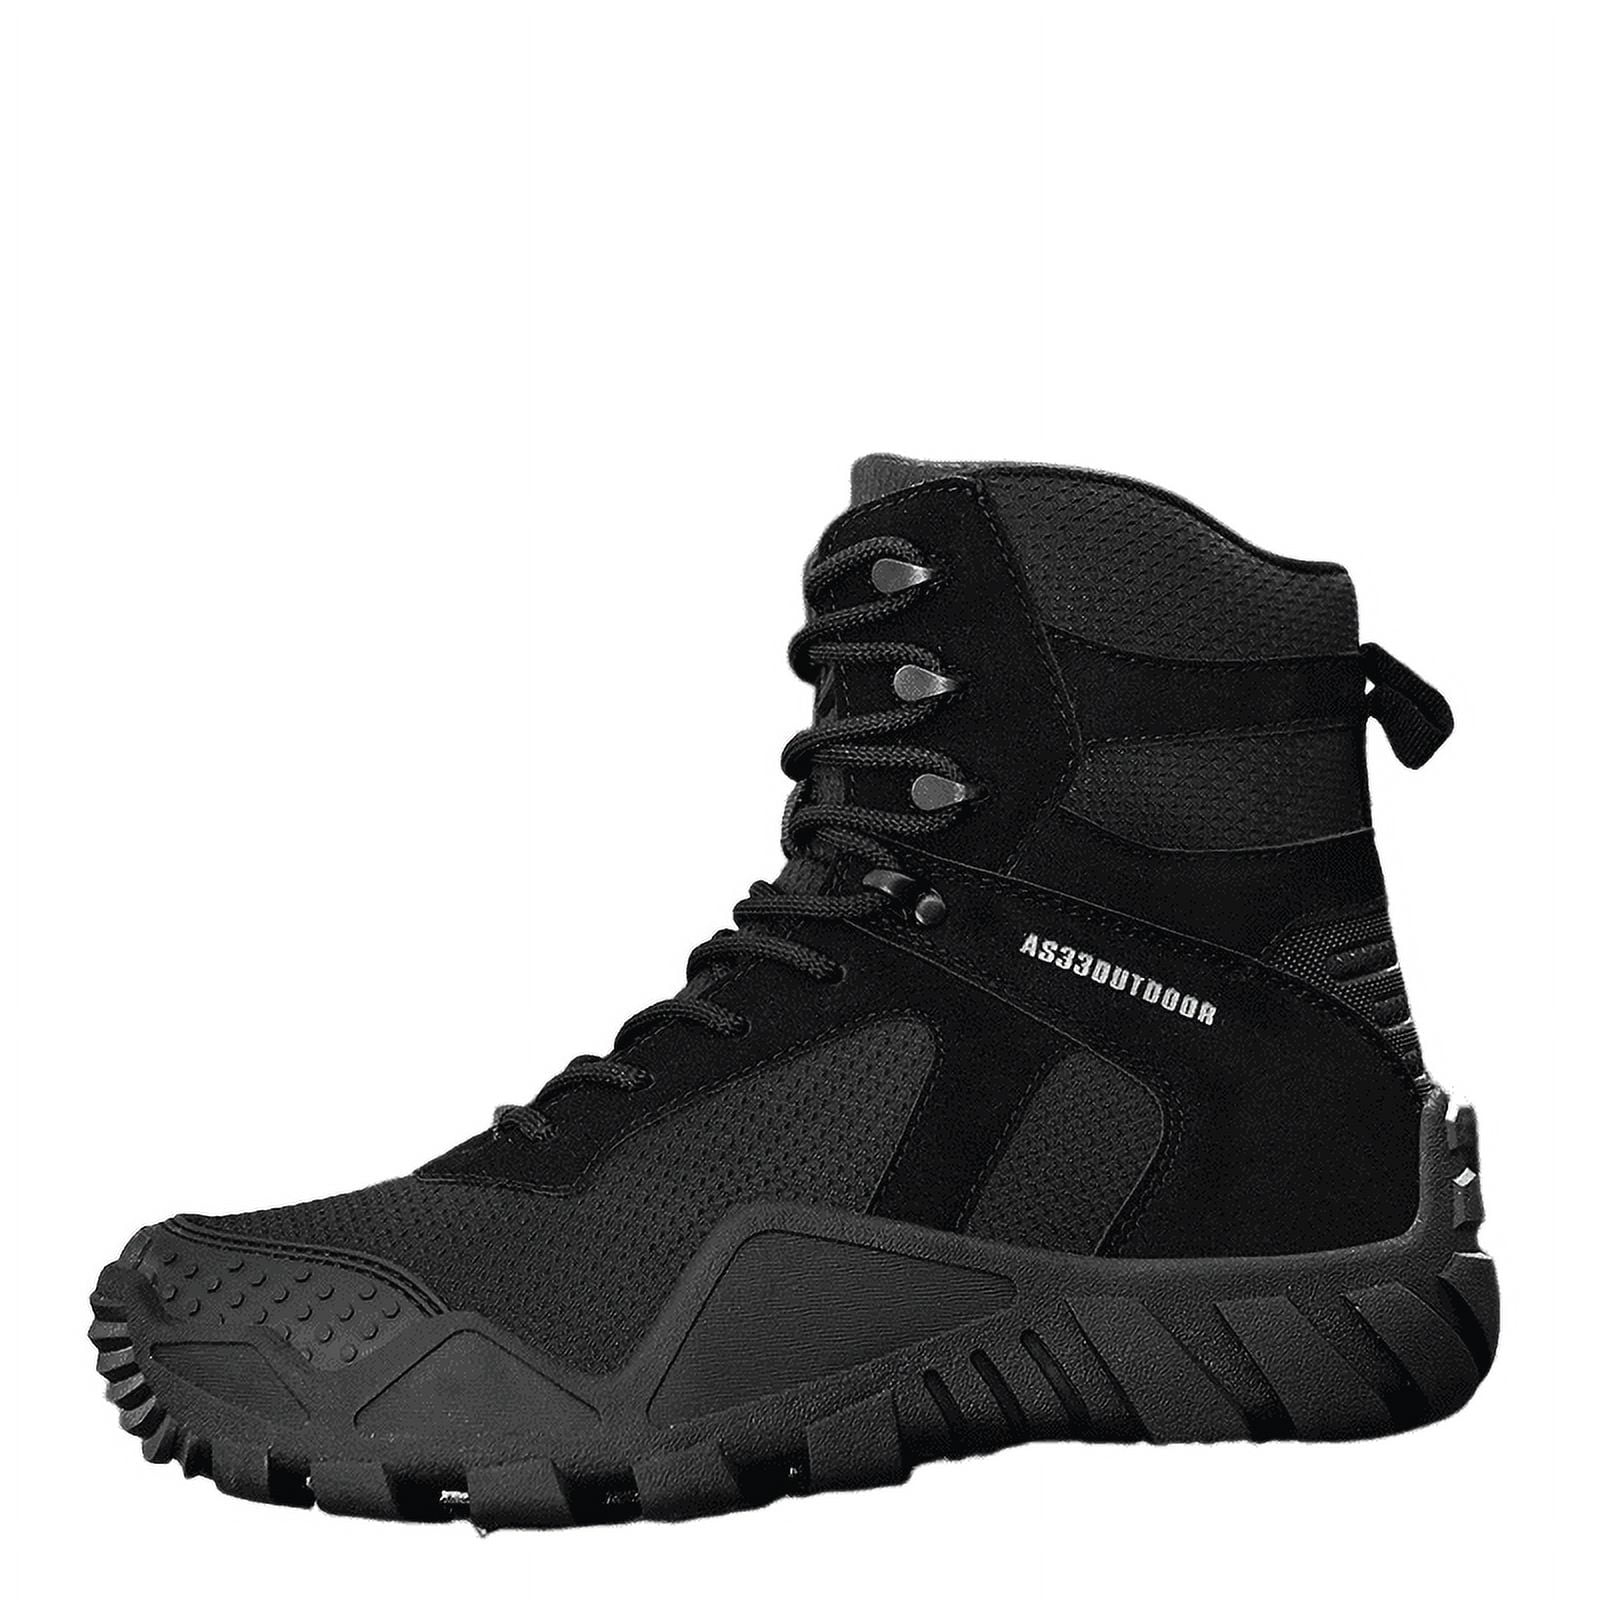 Men's Mid-top Tactical Boots - Waterproof, Non-Slip Sole, Wearable for ...